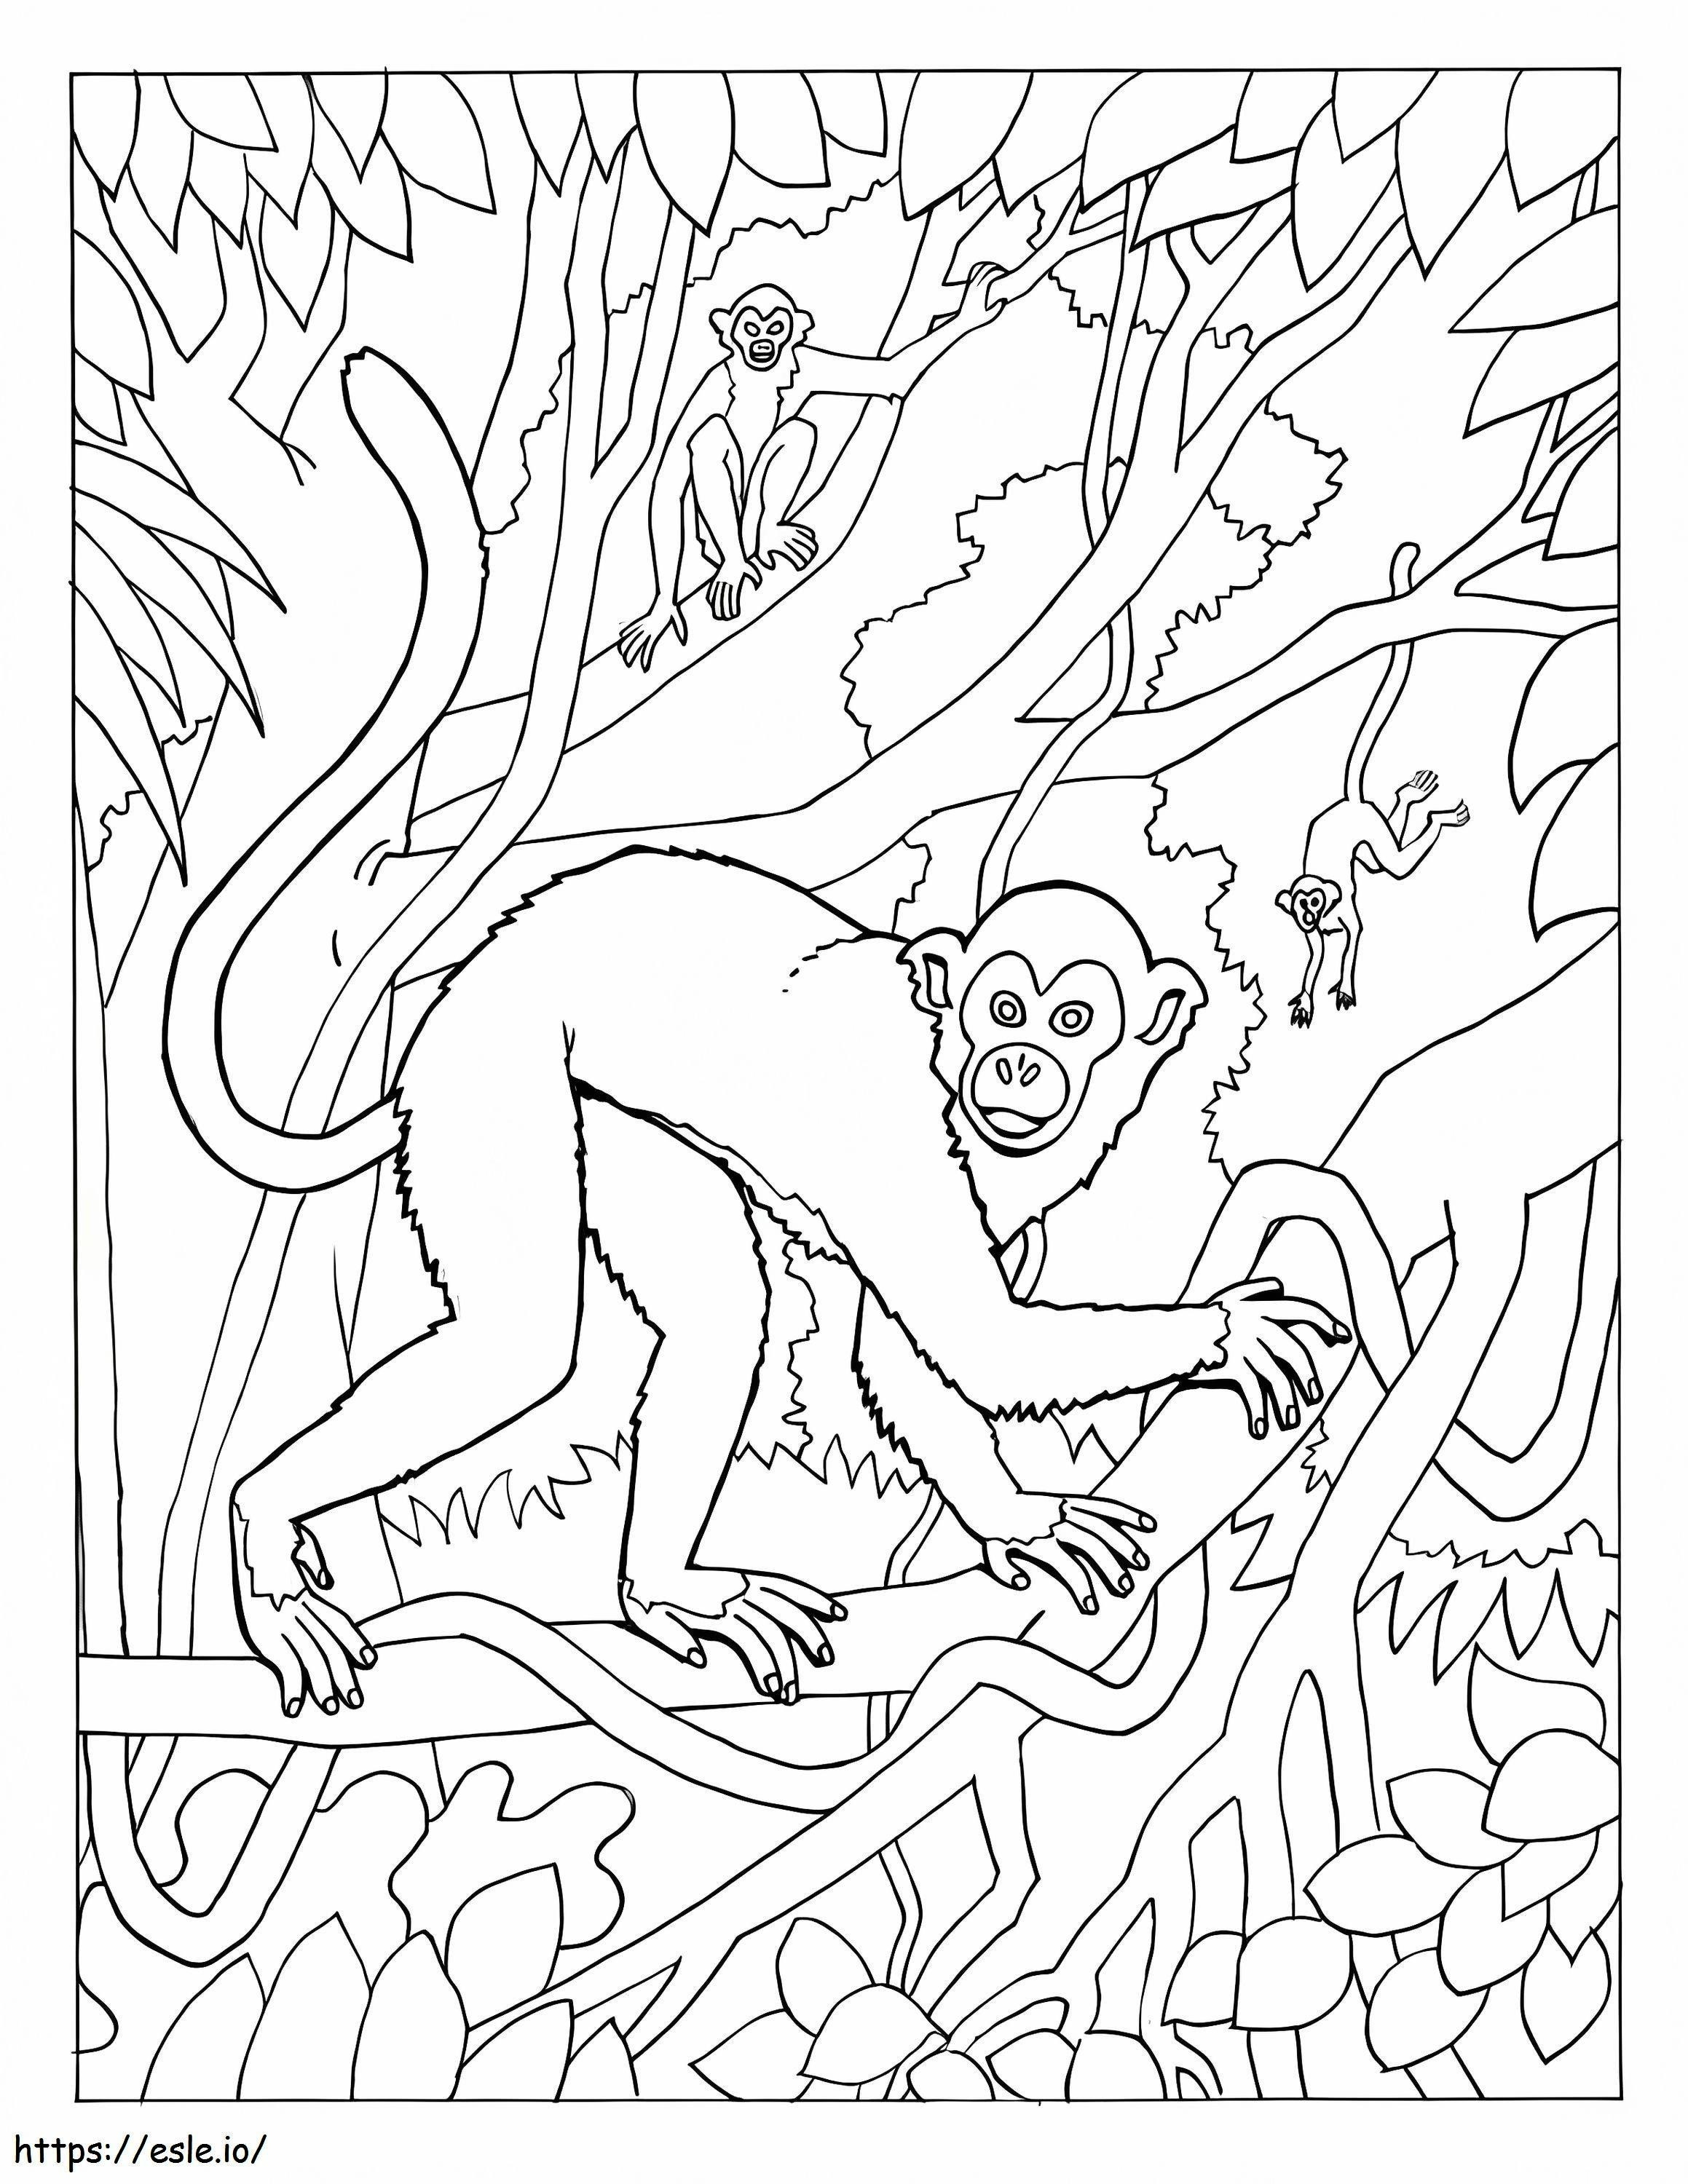 Monkeys coloring page